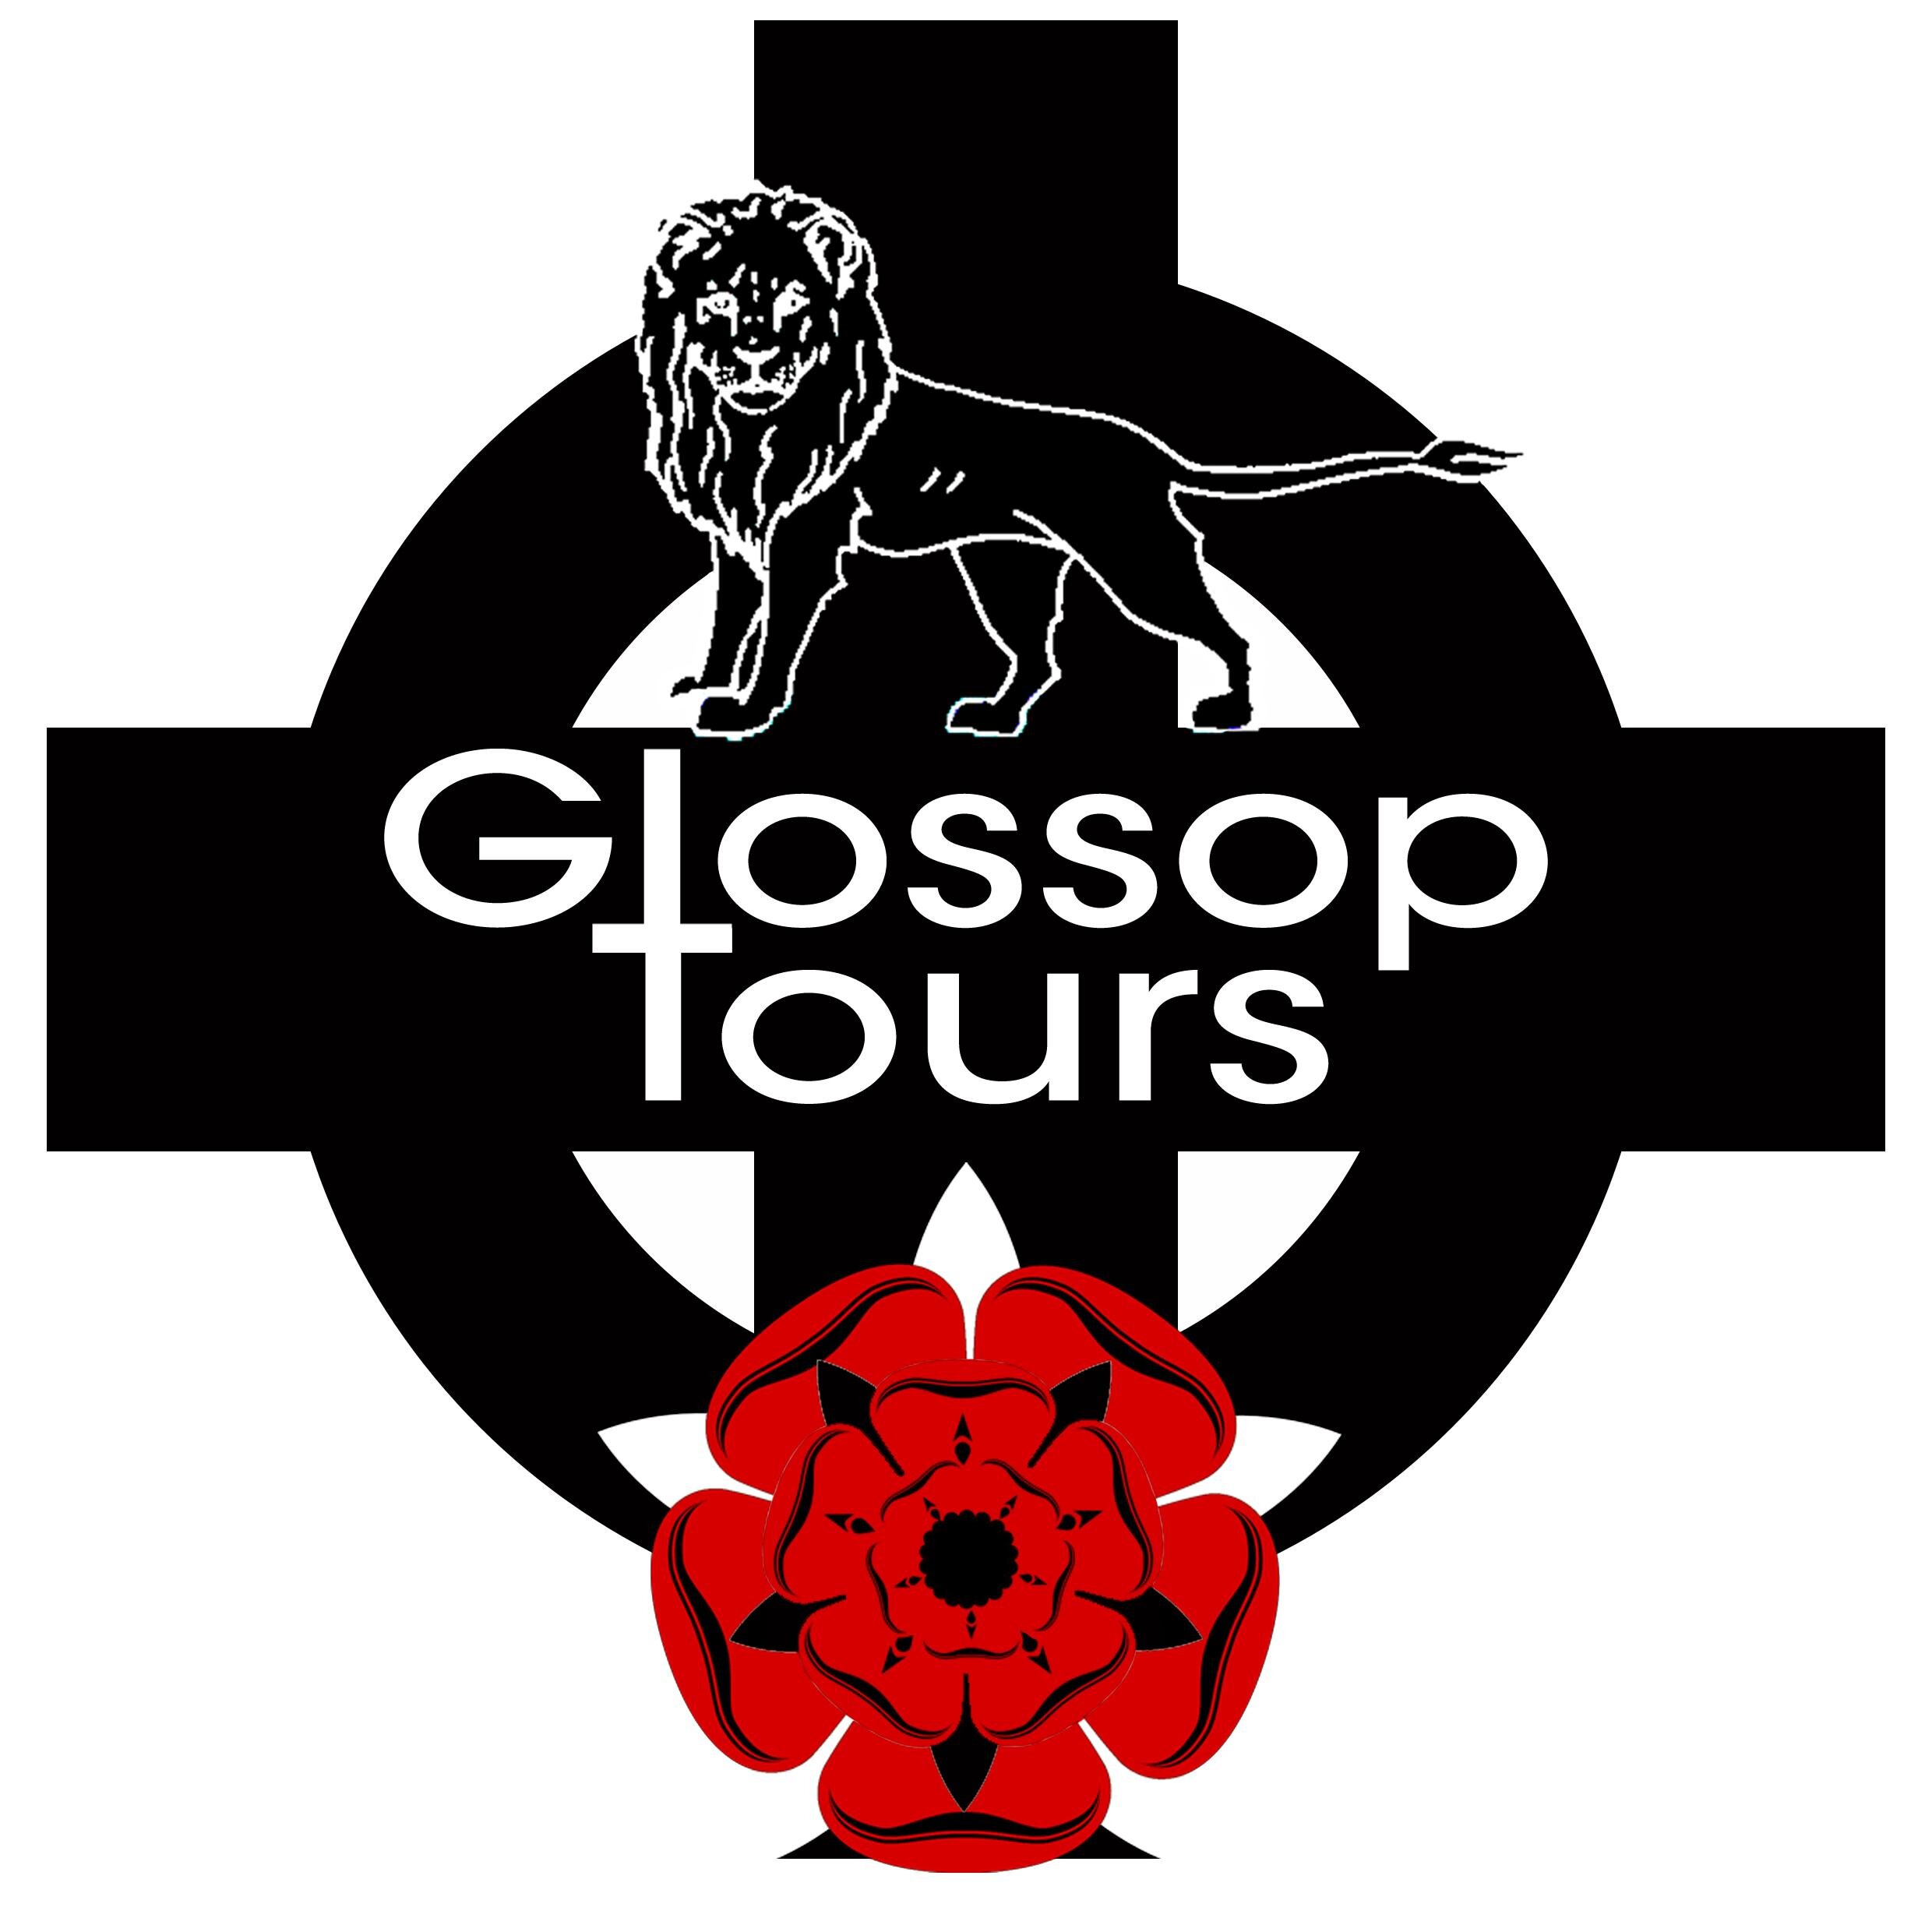 Providing award winning immersive & interactive live history sessions exploring the rich history of Glossop. 20 years of guided tours, talks and presentations